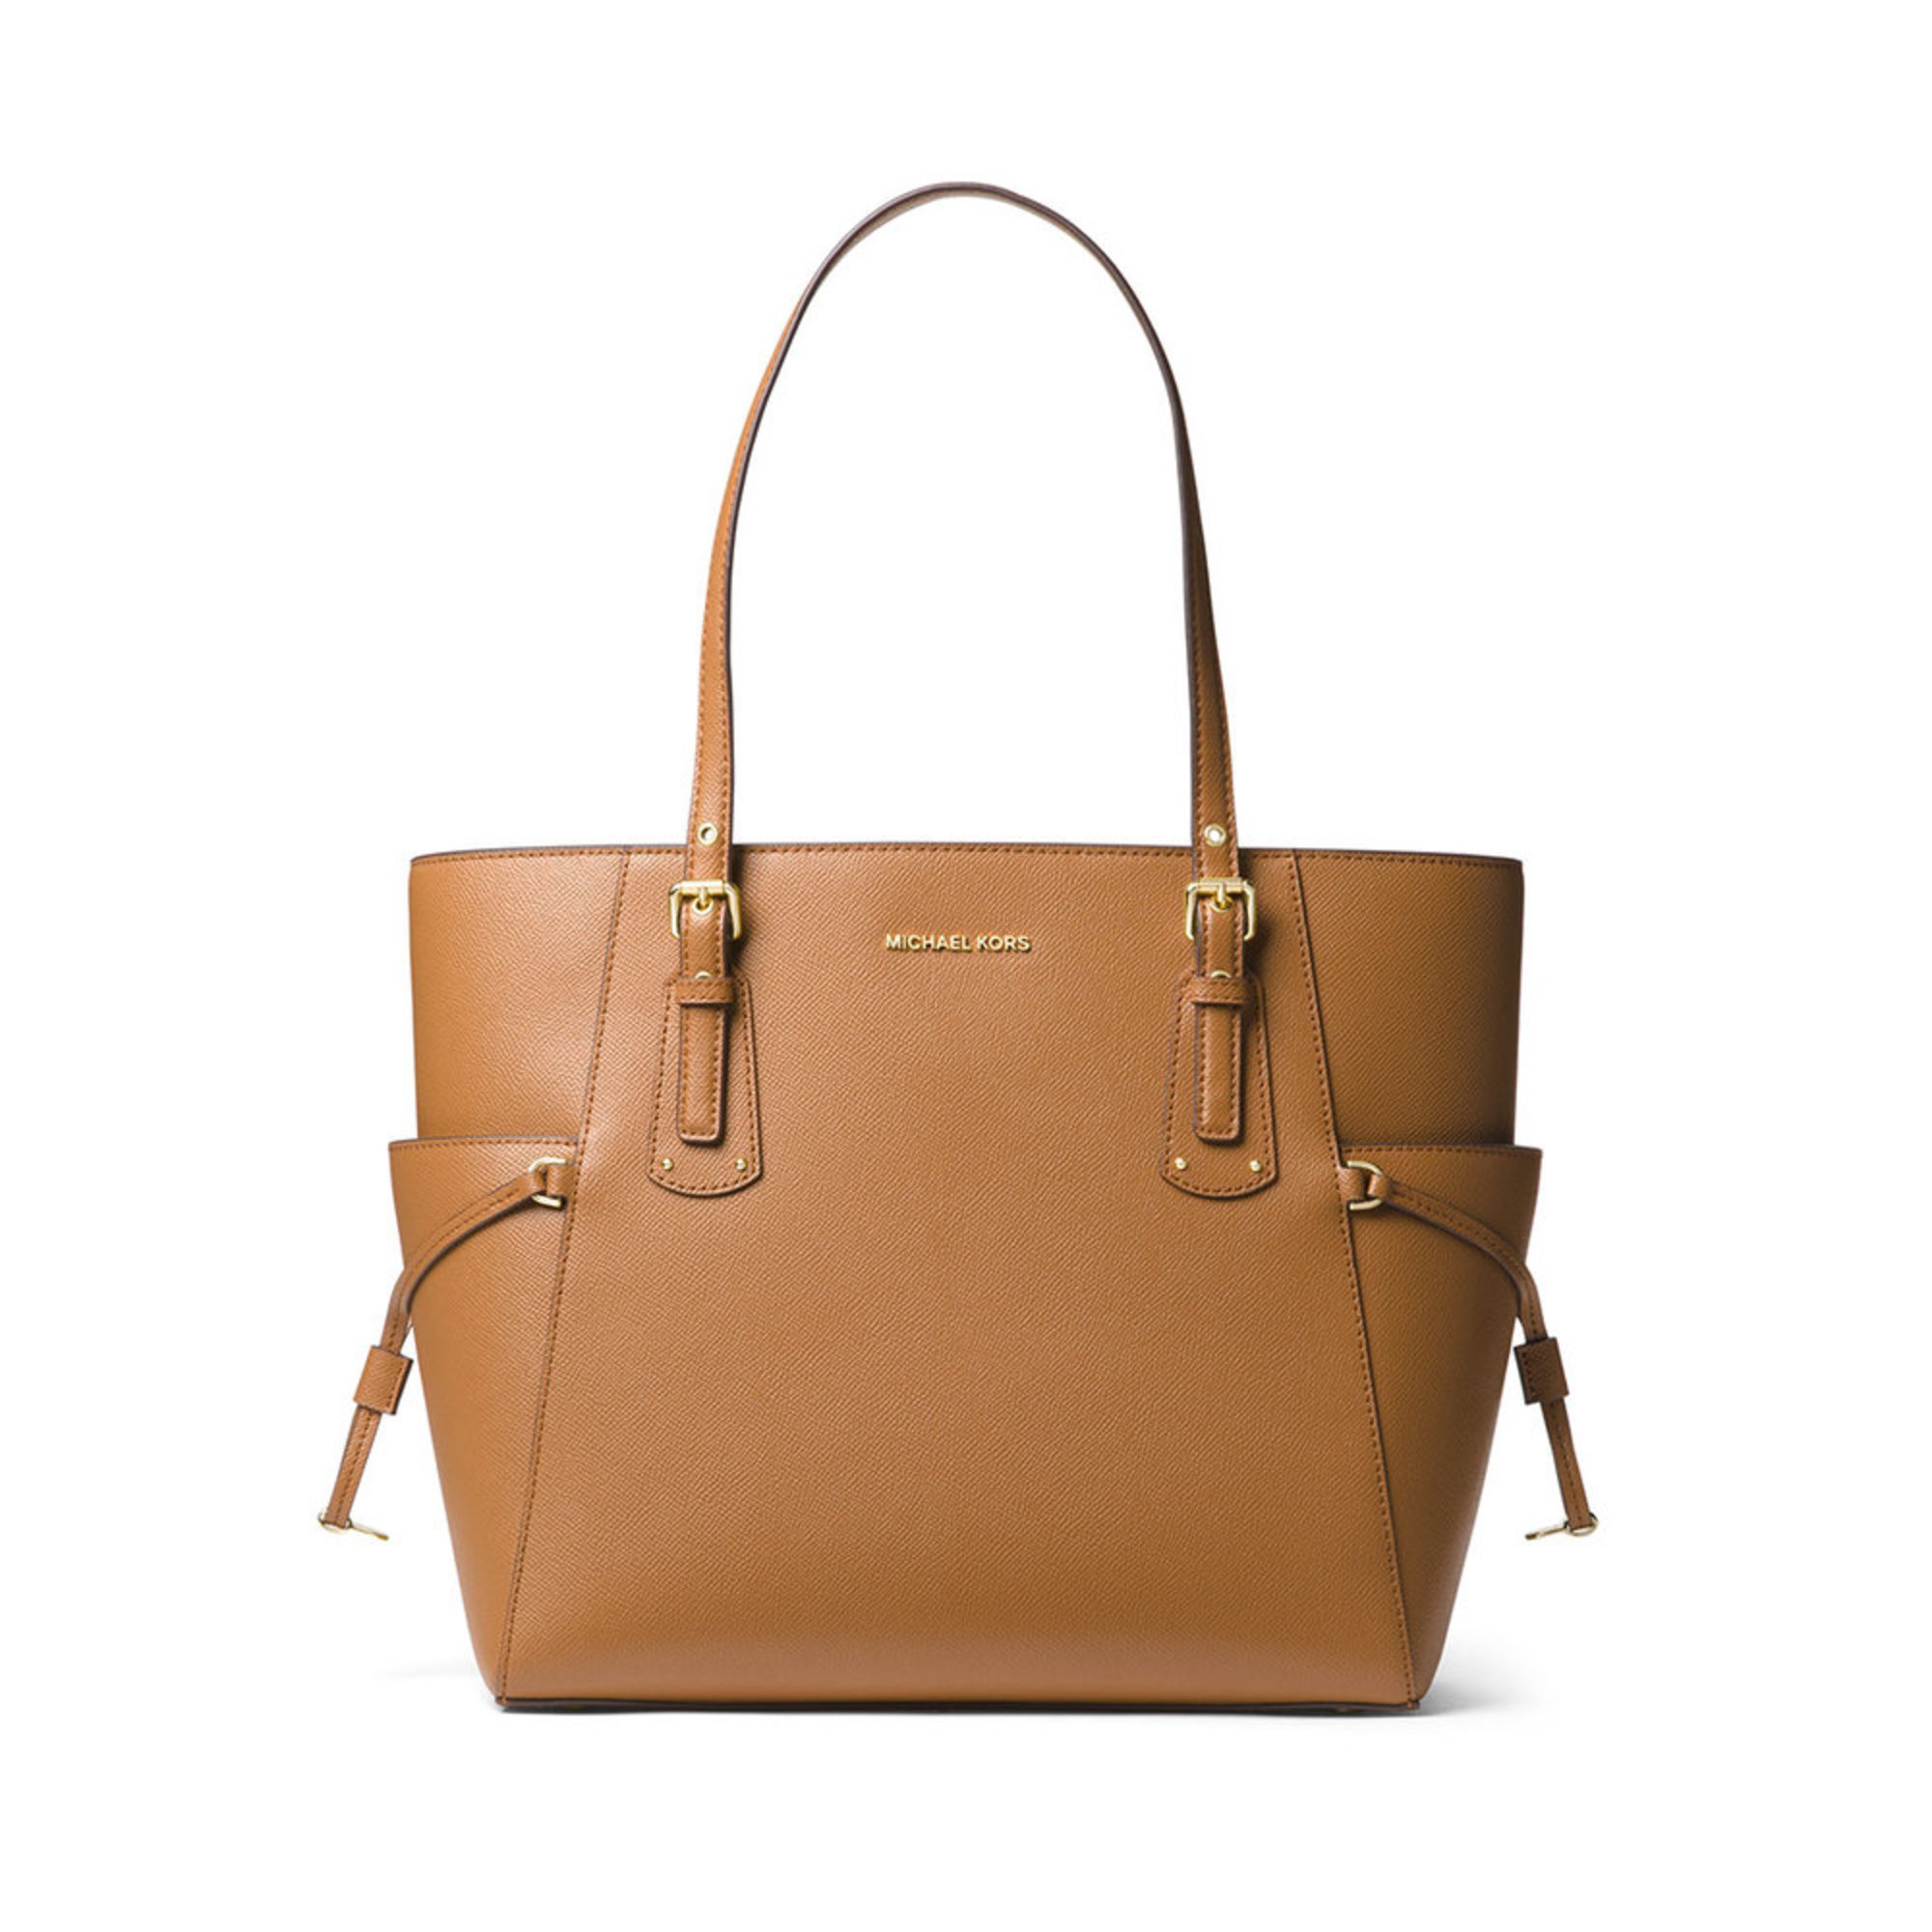 voyager east west tote